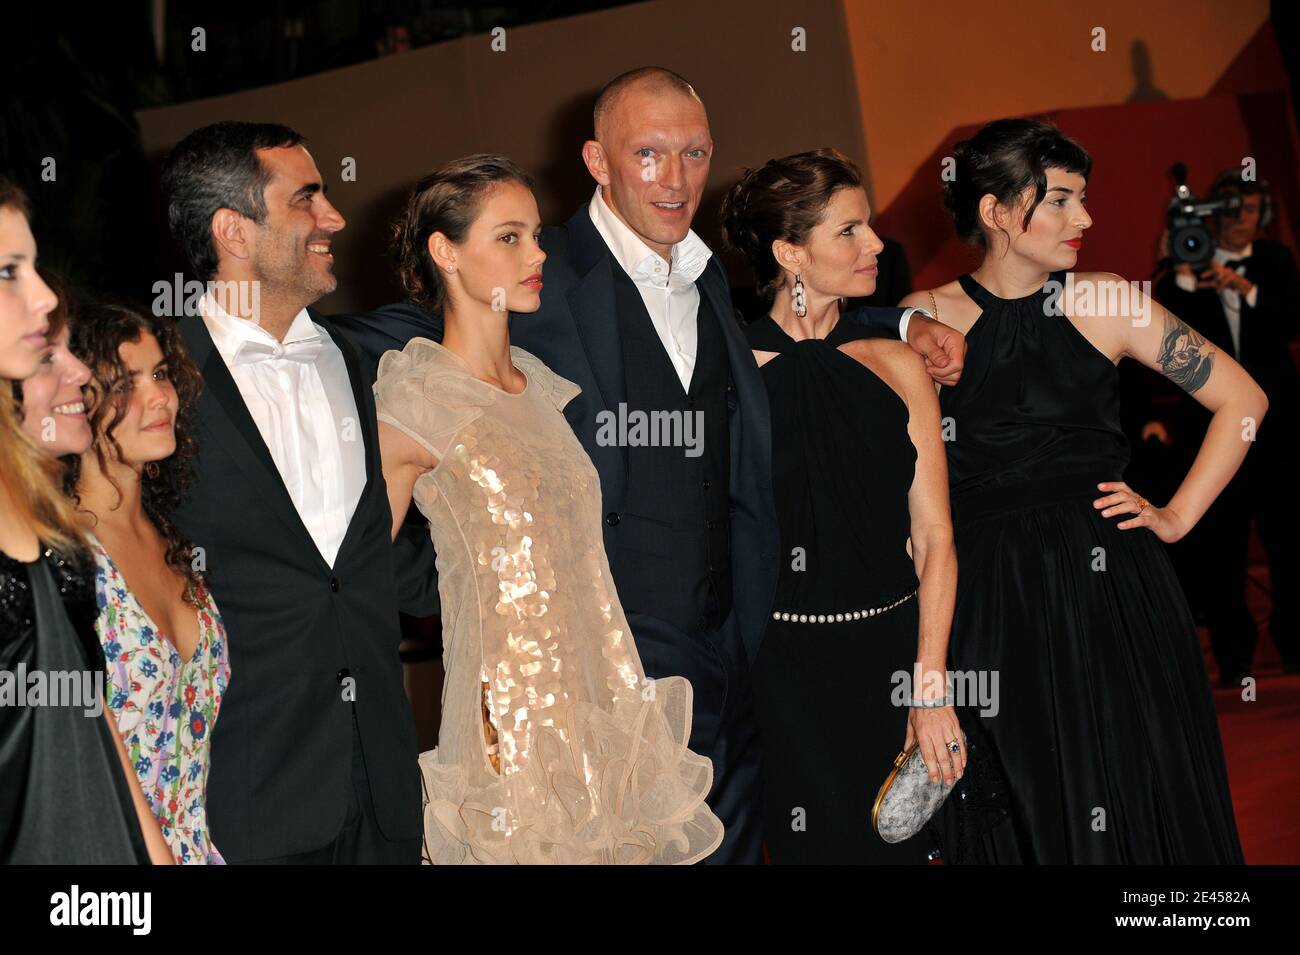 Brazilian actors Nathalia Zemel, Caua Raymond, Josefina Schiler and Debora Bloch, Brazilian director Heitor Dhalia, Brazilian actress Laura Neiva and French actor Vincent Cassel arriving for the screening of 'The White Ribbon' during the 62nd Cannes Film Festival at the Palais des Festivals in Cannes, France on May 21, 2009. Photo by Nebinger-Orban/ABACAPRESS.COM Stock Photo